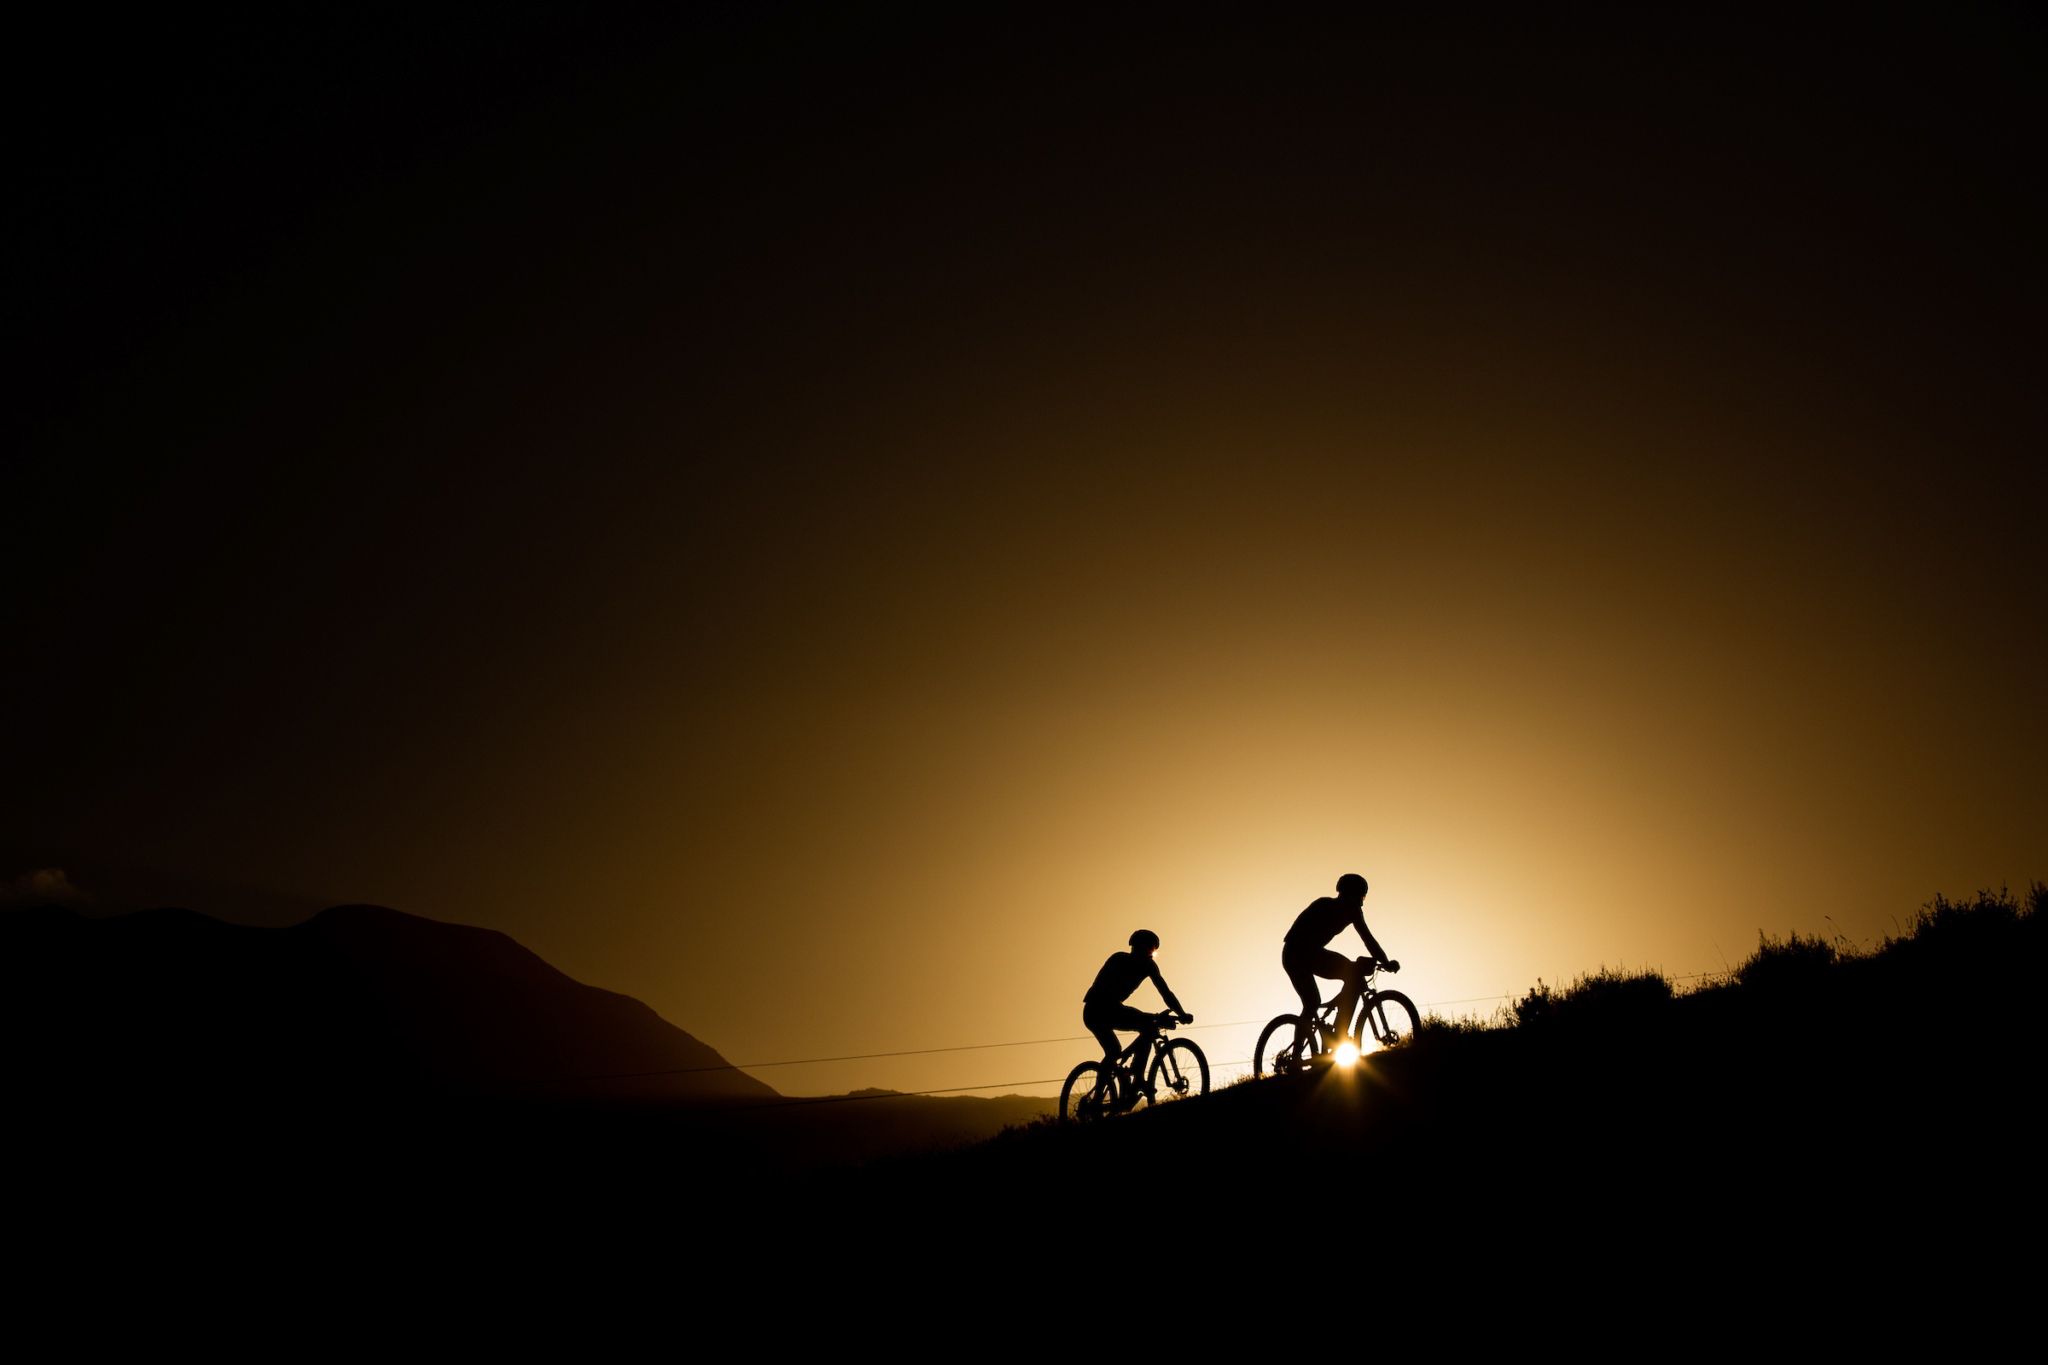 <br />Photo by Sam Clark/Cape Epic